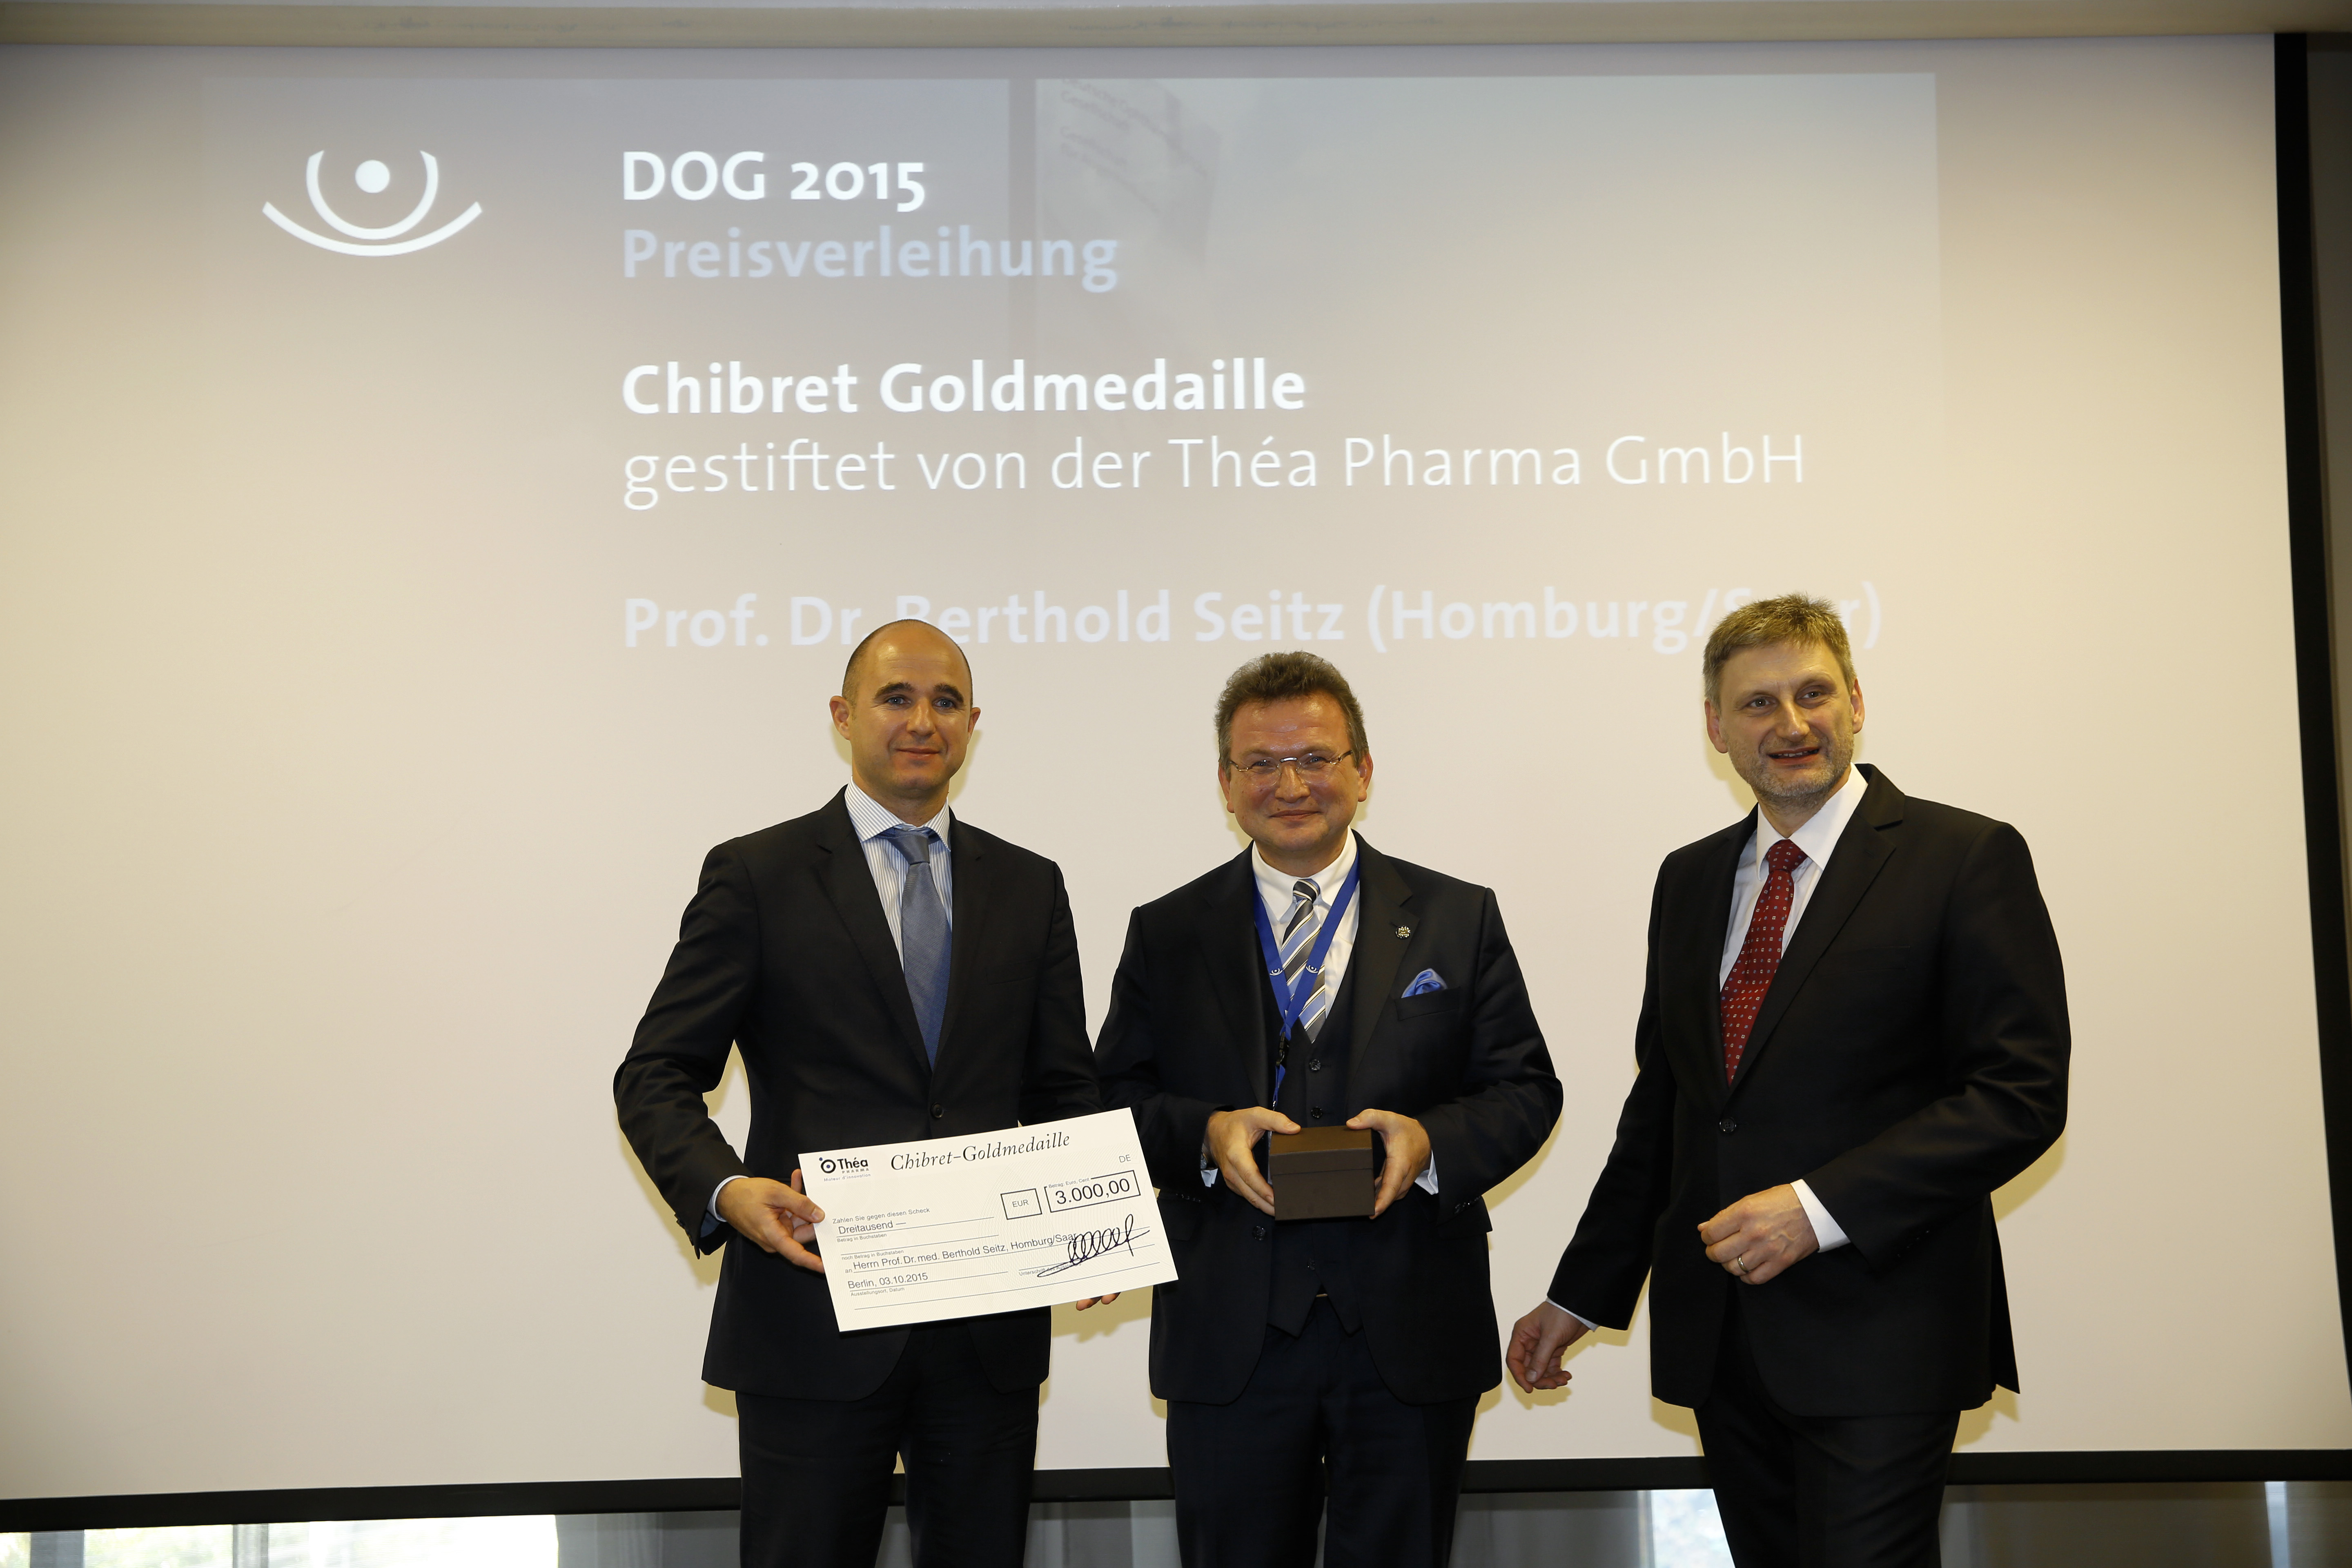 Chibret Goldmedaille 2015